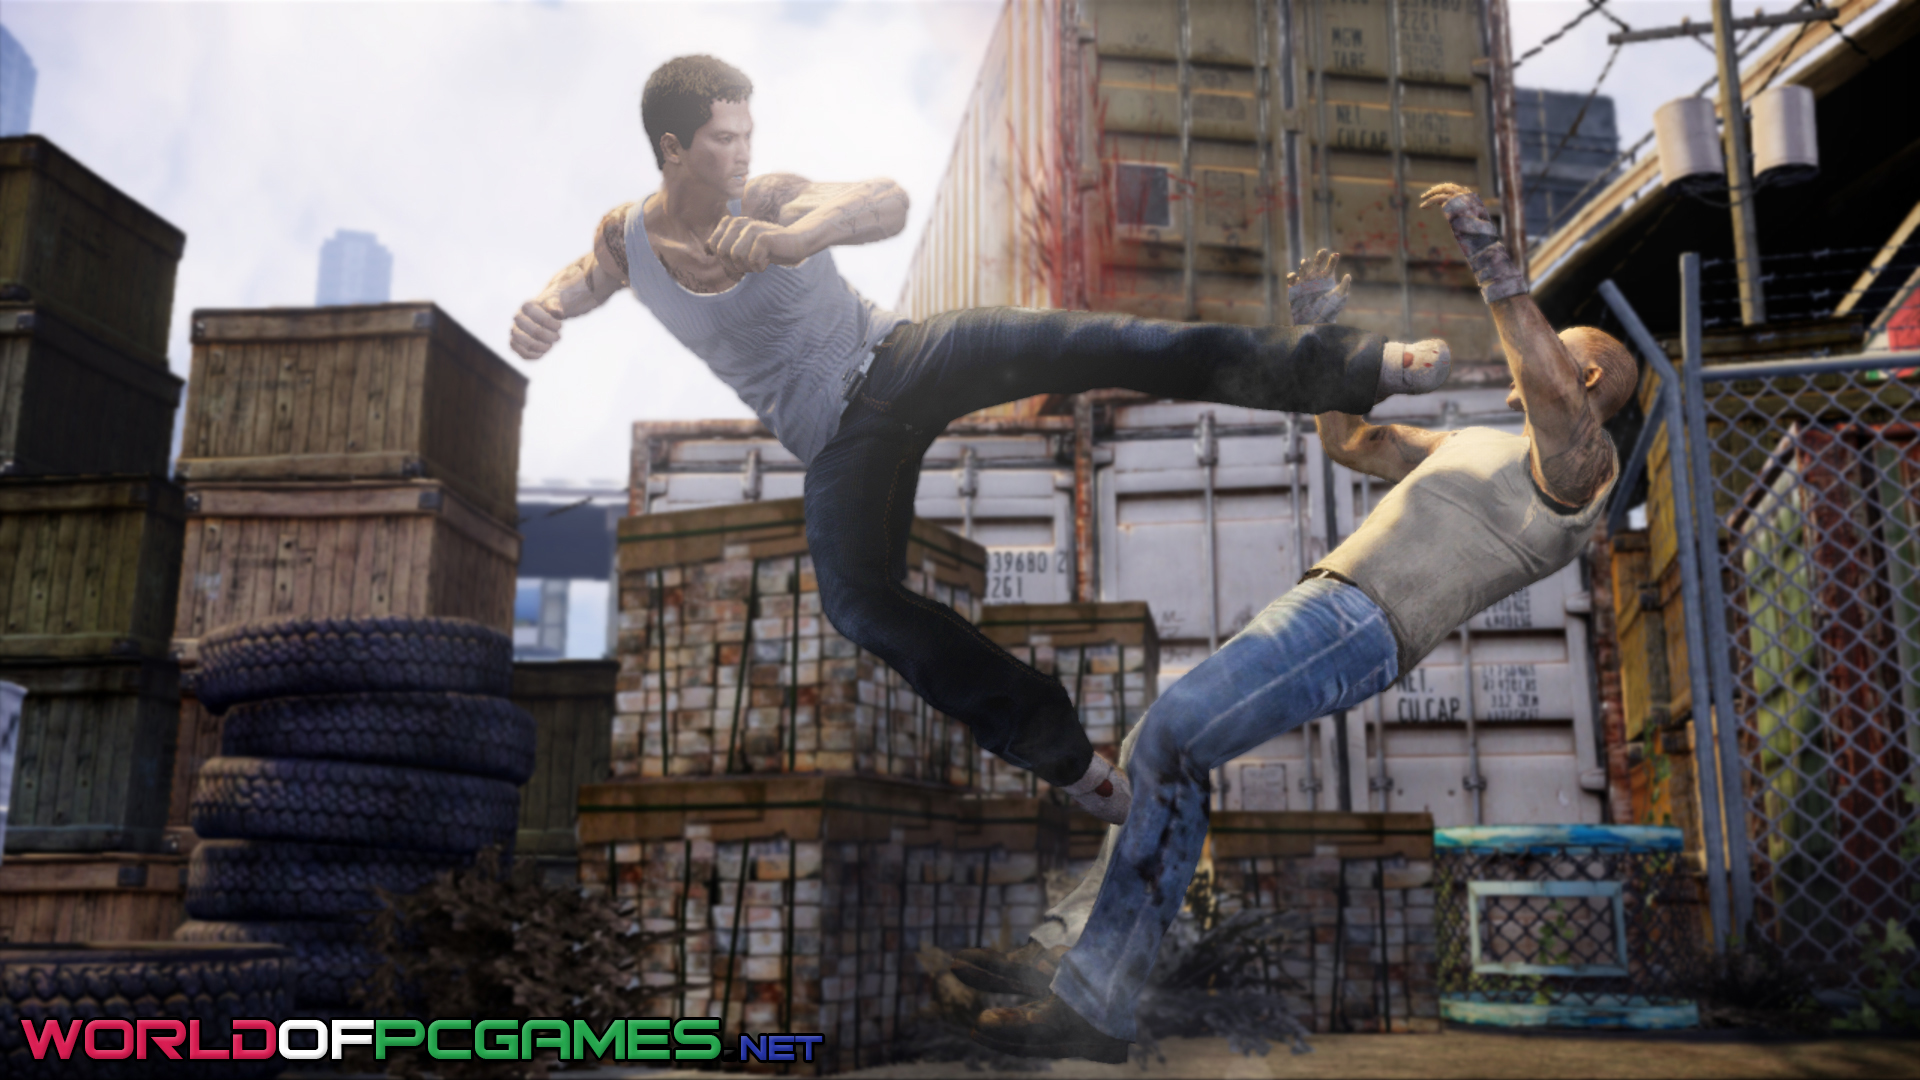 Sleeping Dogs Free Download By worldof-pcgames.net